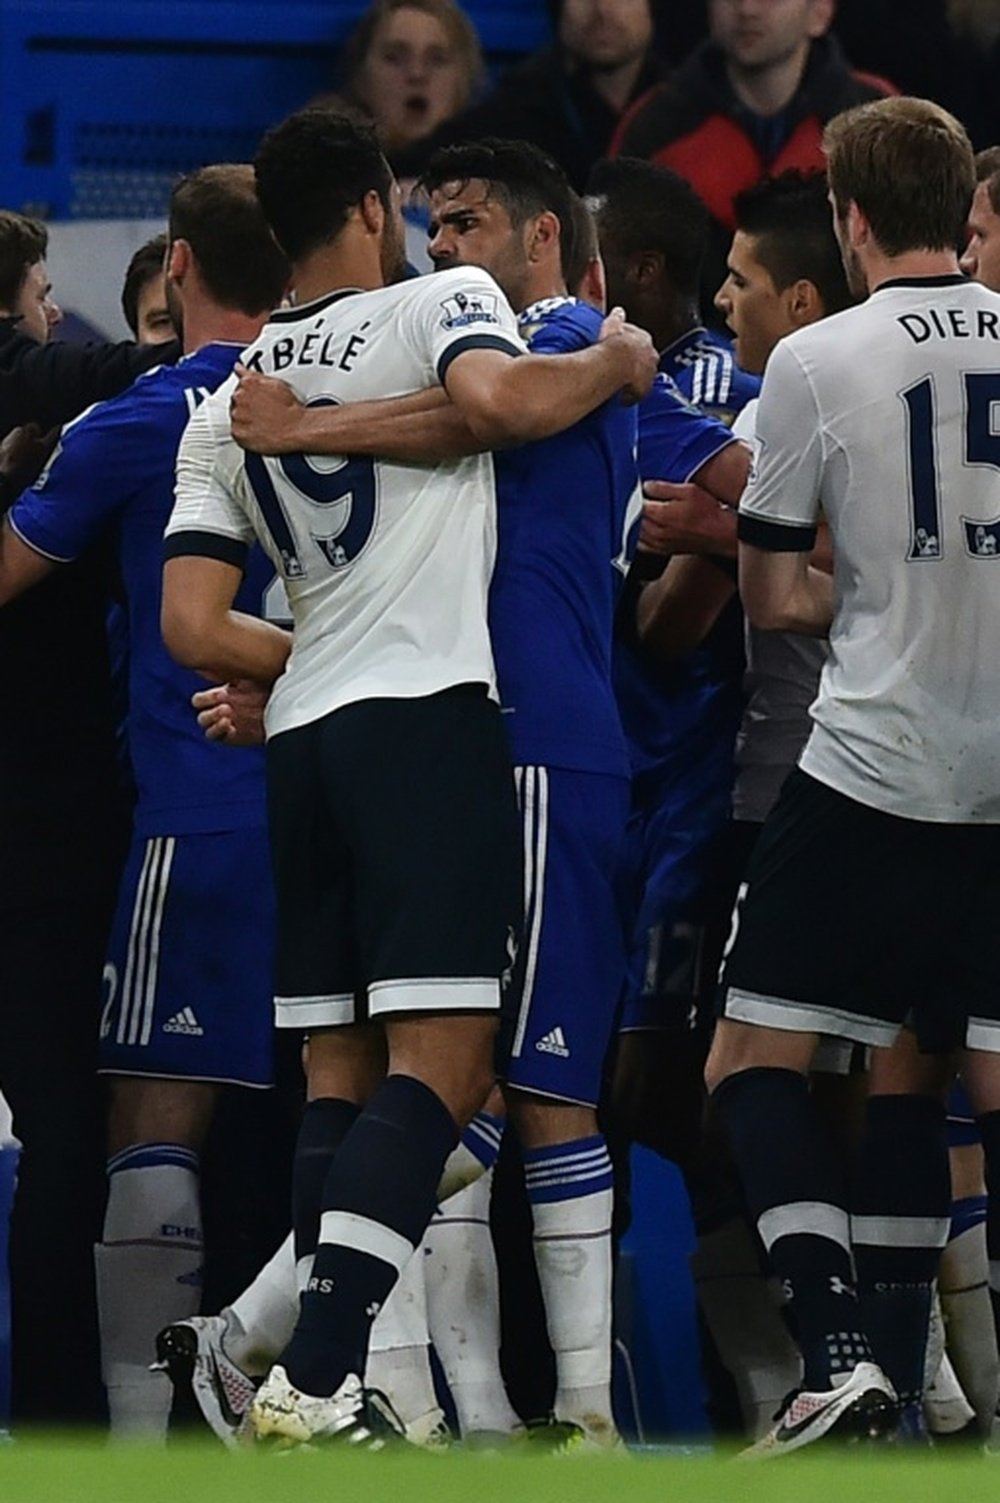 Tottenham Hotspur midfielder Mousa Dembele clashed with Chelsea striker Diego Costa. BeSoccer